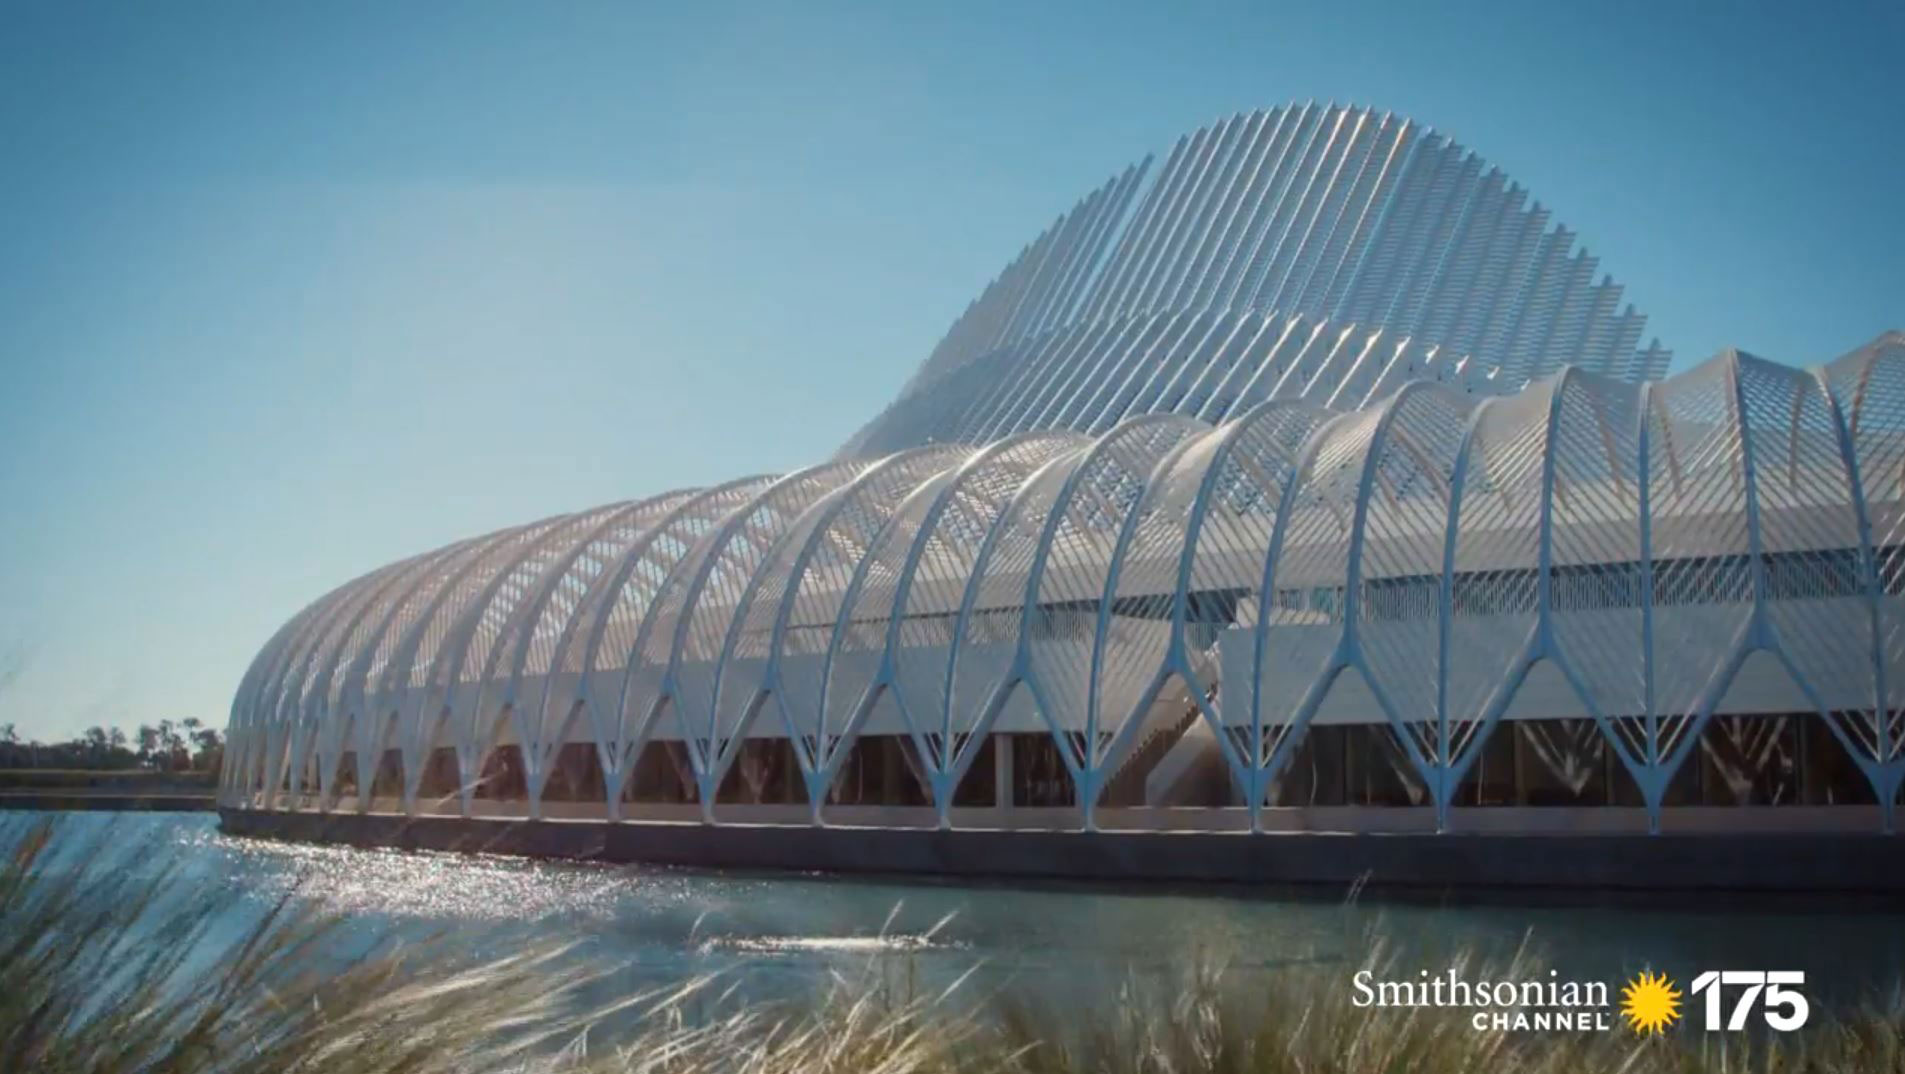 Innovation Science and Technology Building on the Smithsonian Channel show How Did They Build That?